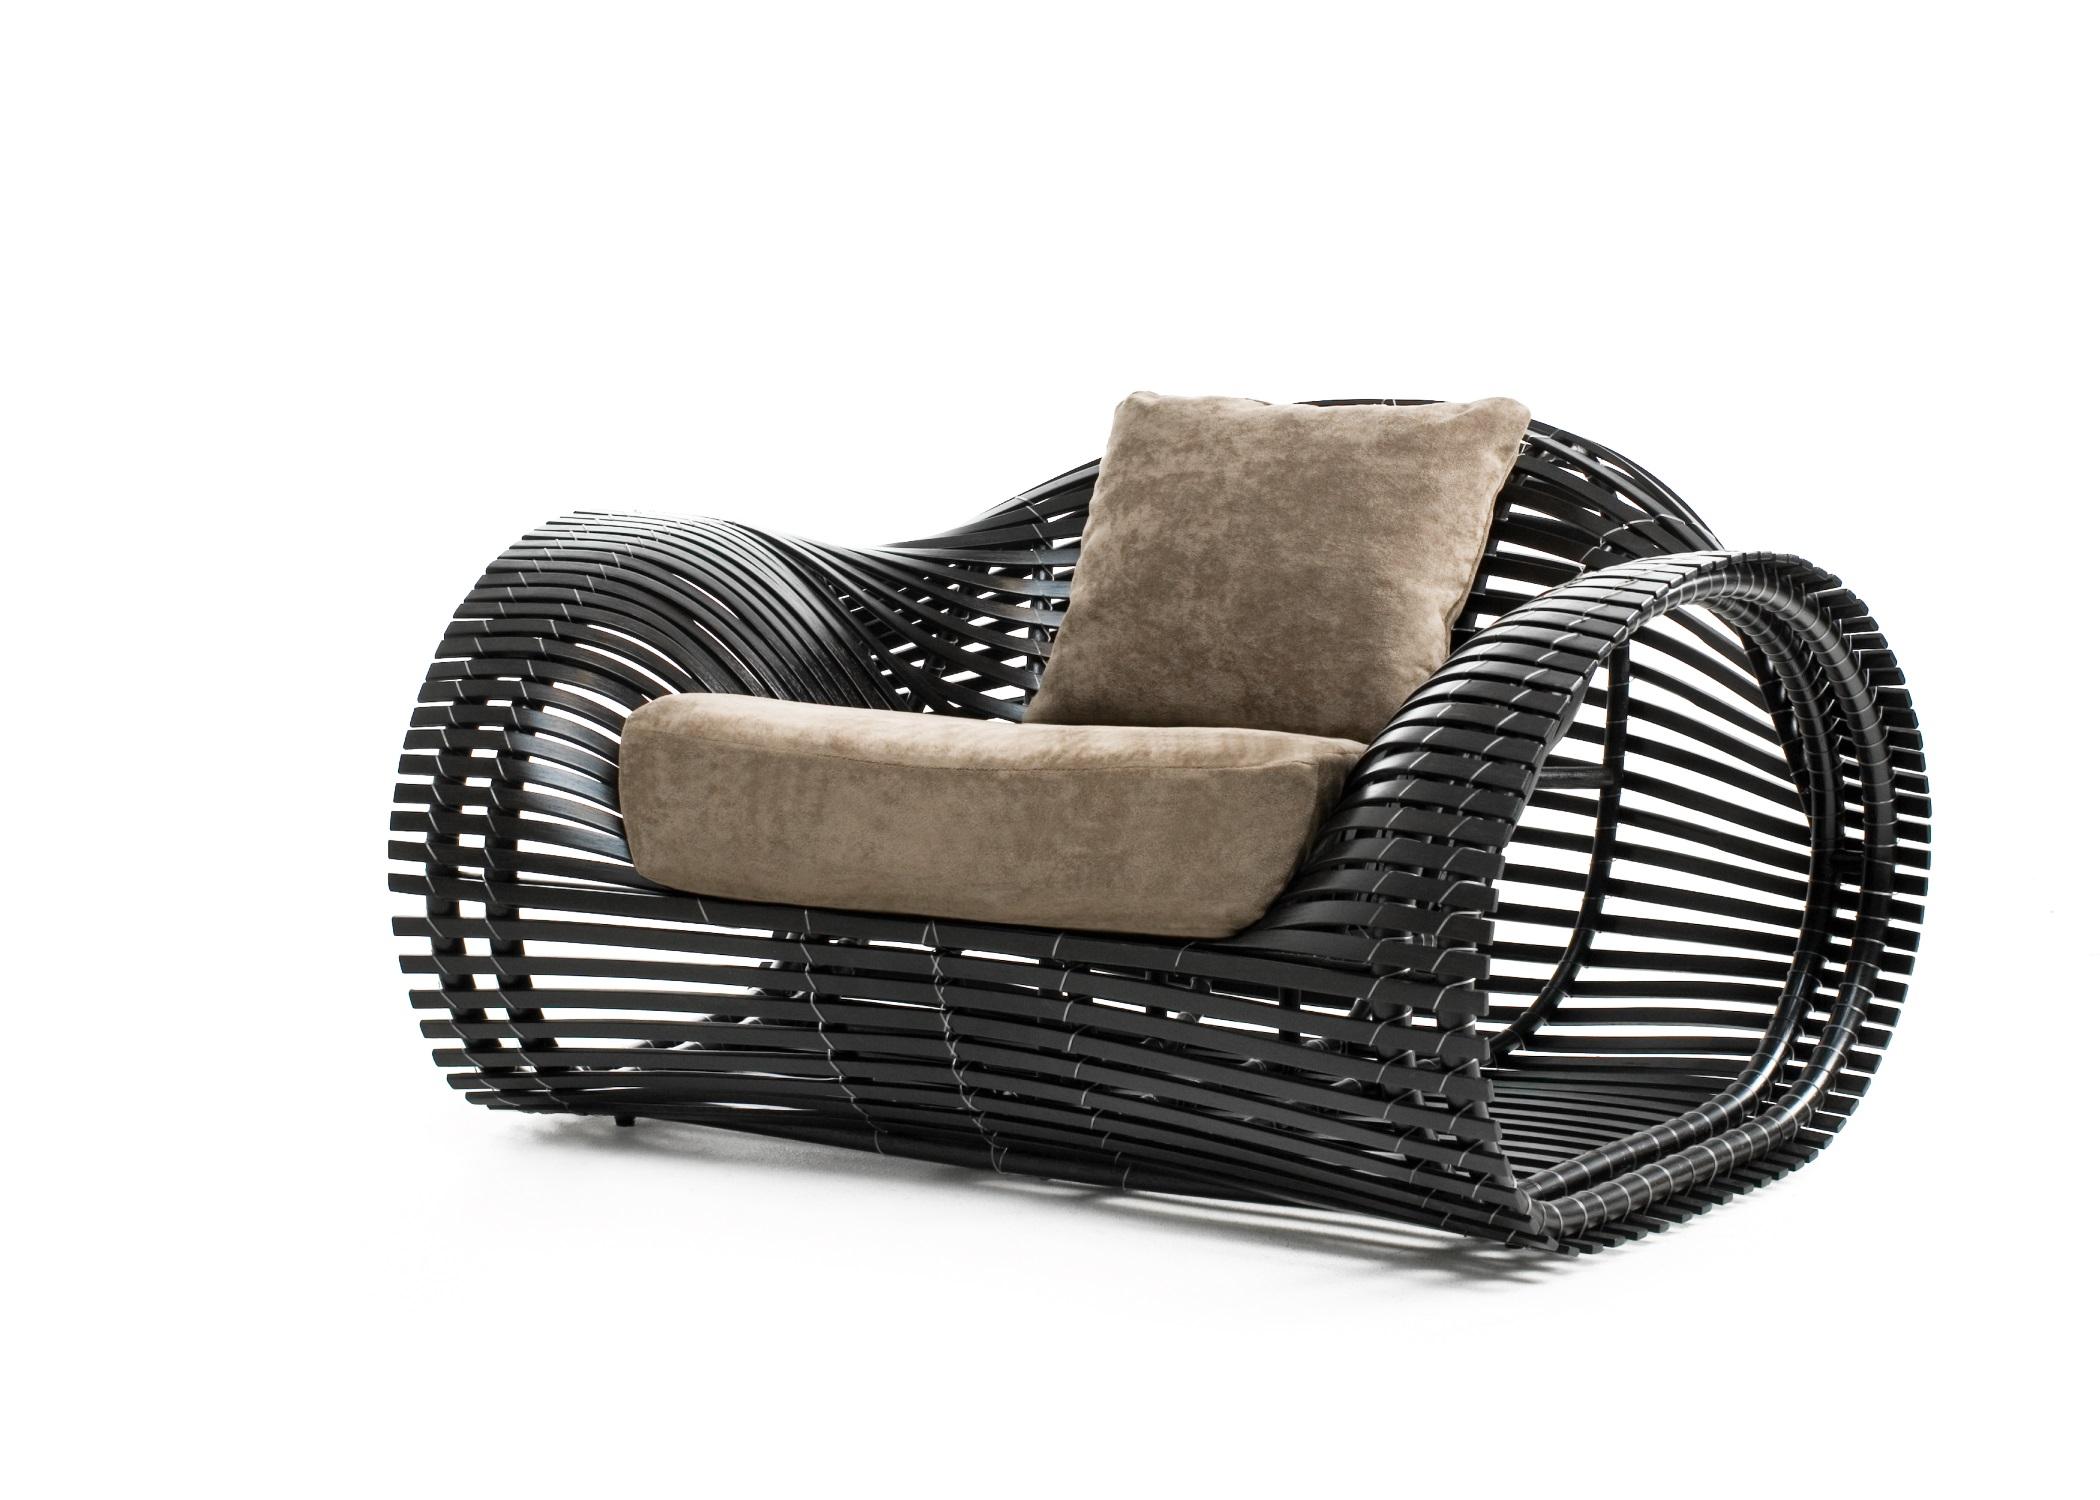 Outdoor Lolah easy armchair by Kenneth Cobonpue
Materials: Polyethelene. Aluminum.
Also available in other colors and for indoors.
Dimensions: 103cm x 126cm x H 70cm

Created using construction techniques similar to boat-building, Lolah entices